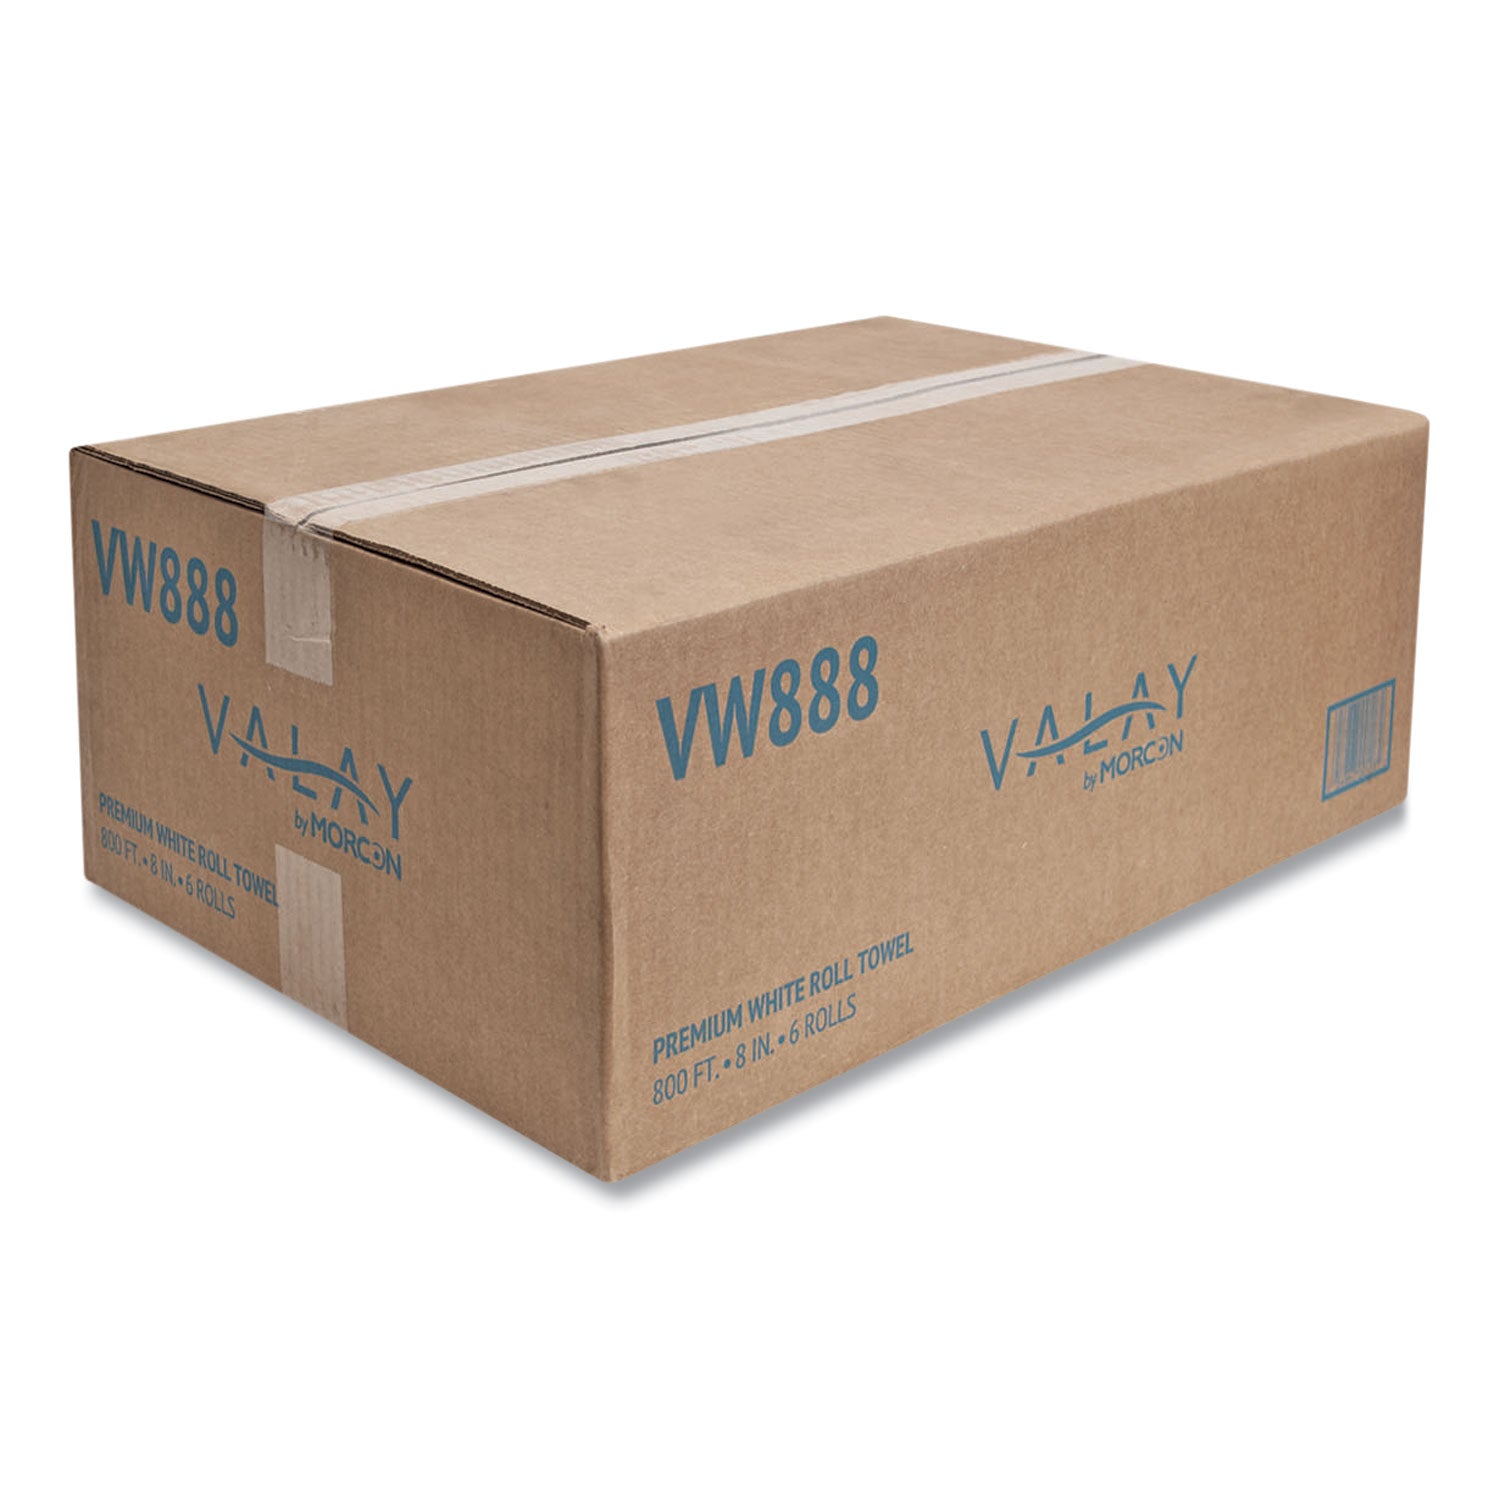 valay-proprietary-roll-towels-1-ply-8-x-800-ft-white-6-rolls-carton_morvw888 - 2